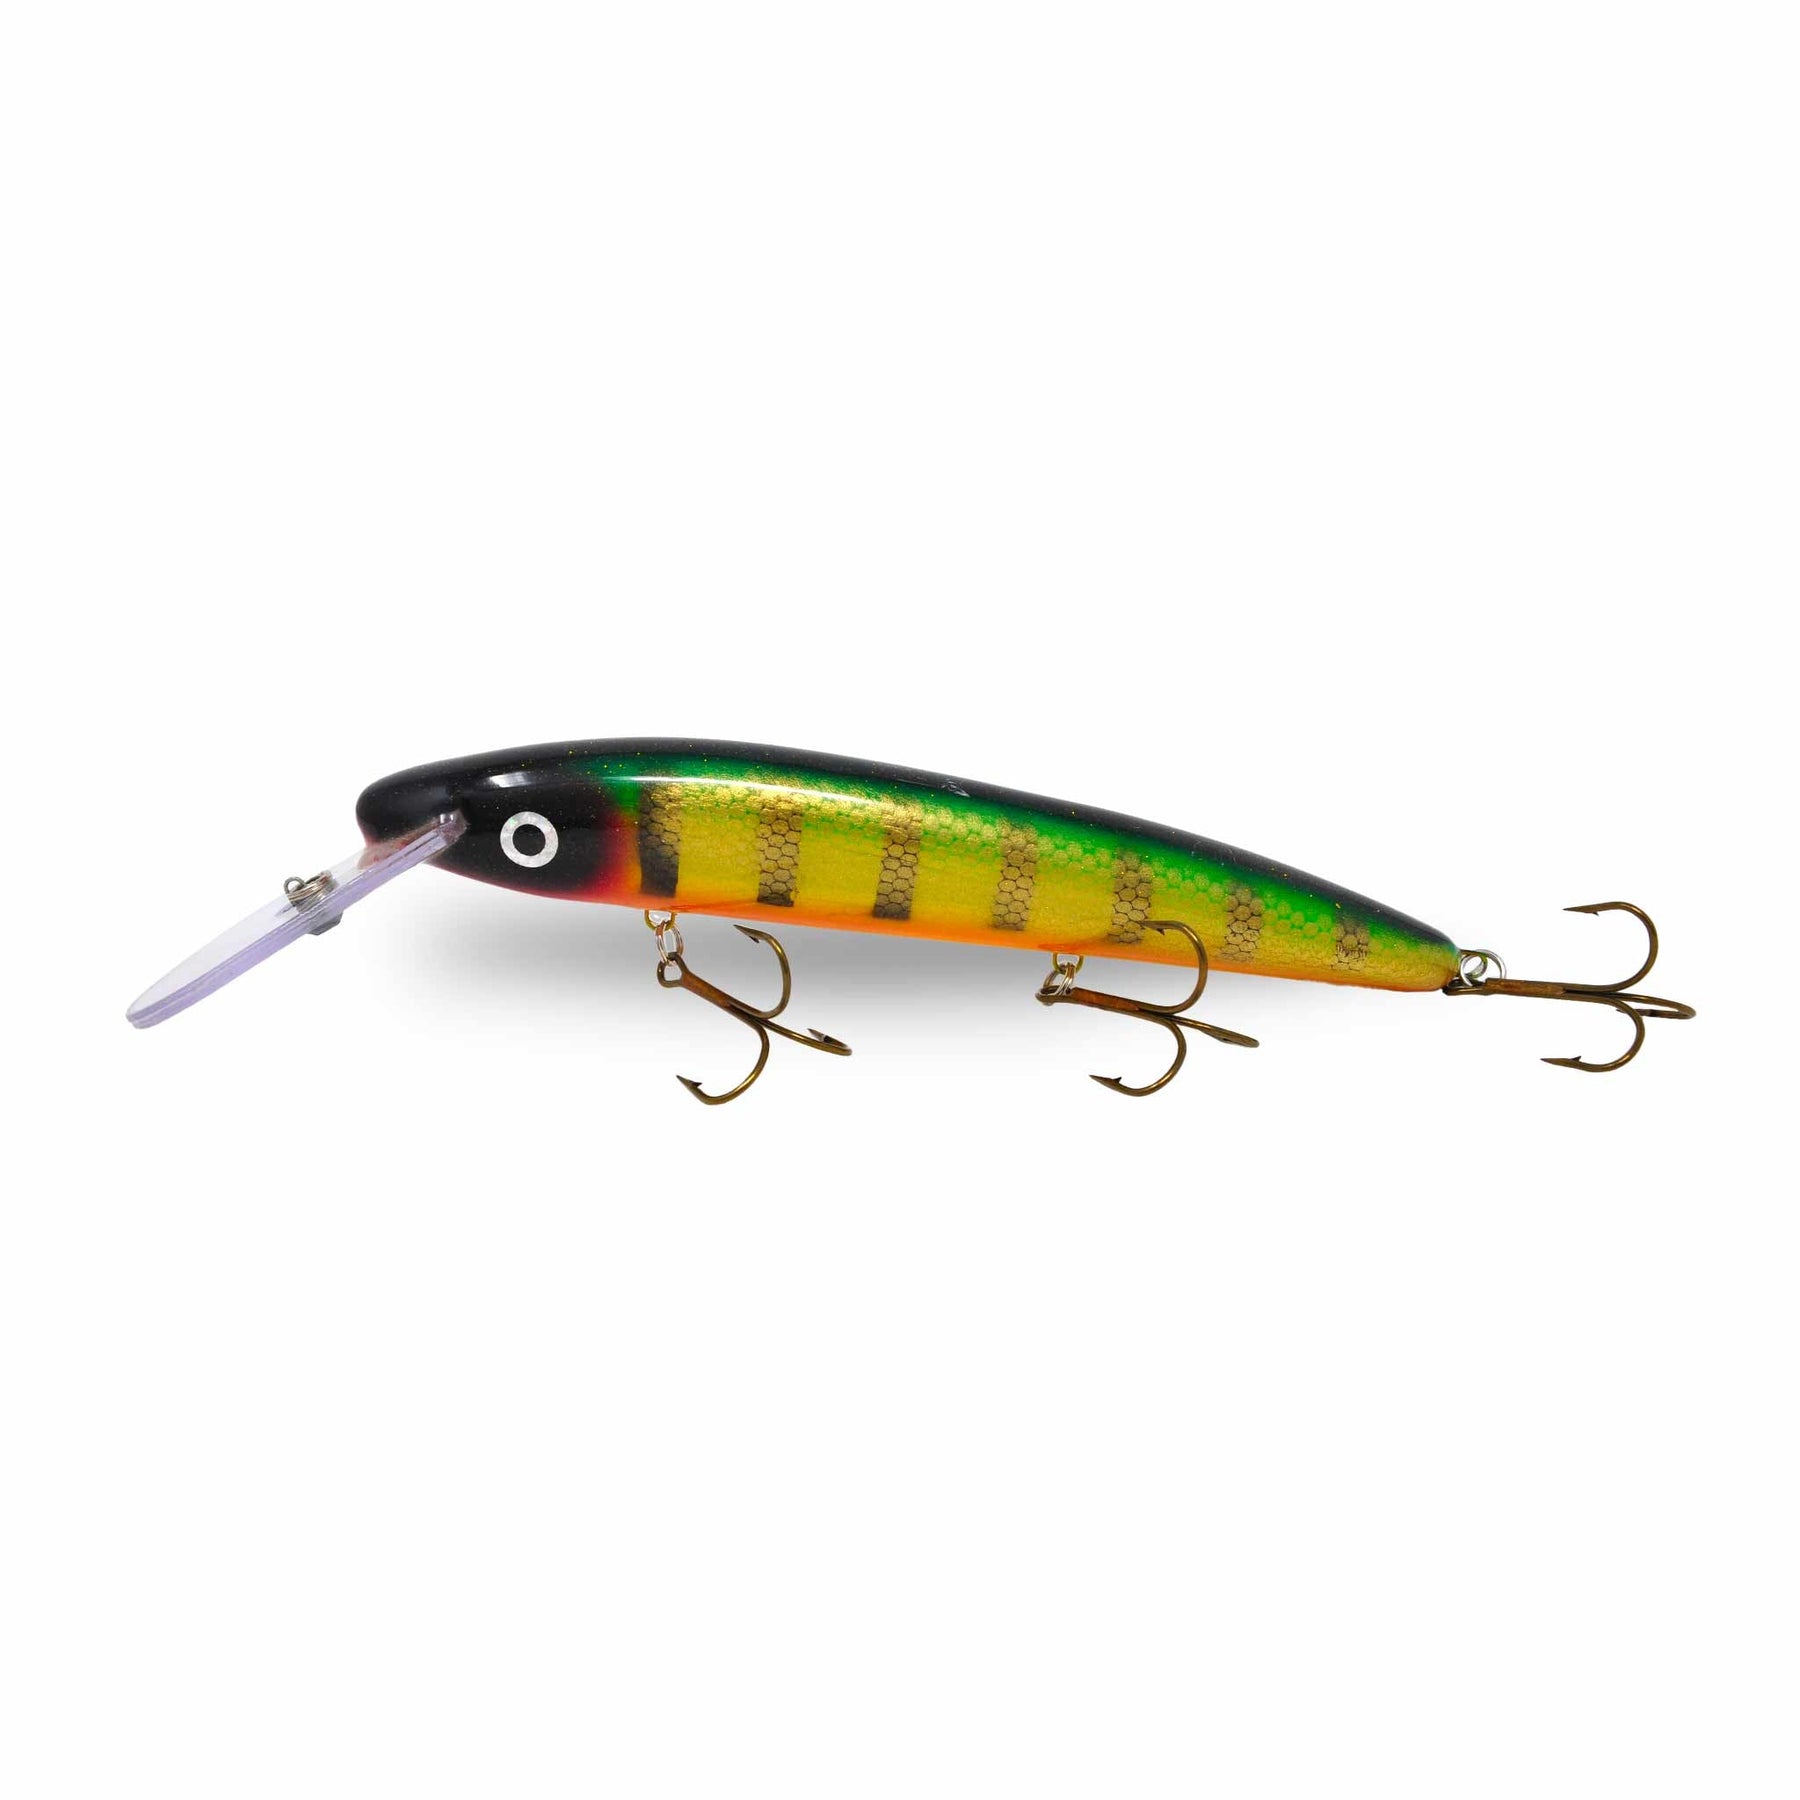 View of Crankbaits Slammer 10" Deep Minnow Crankbait Perch available at EZOKO Pike and Musky Shop